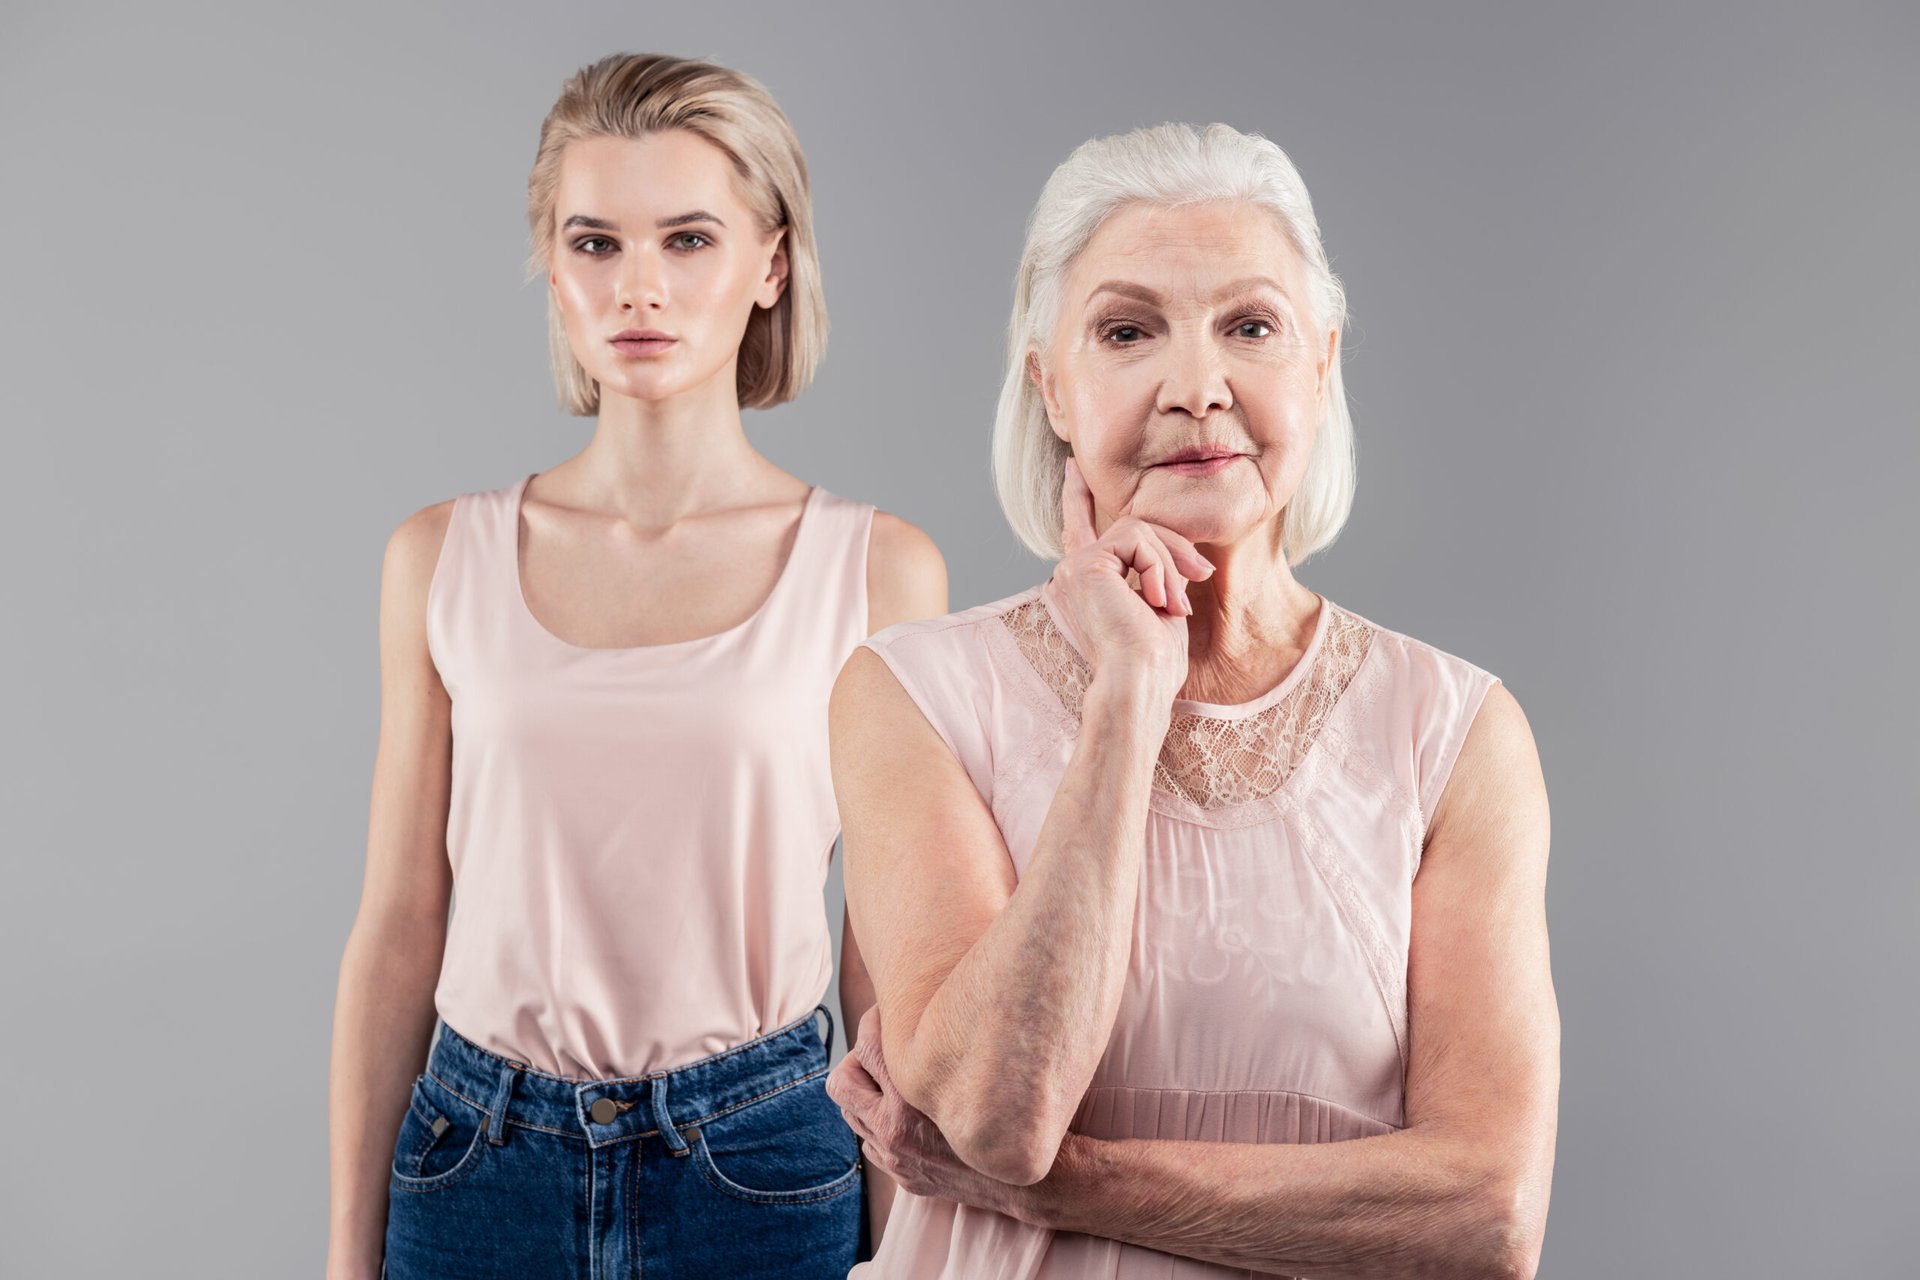 Women from two generations, millennial and baby boomer